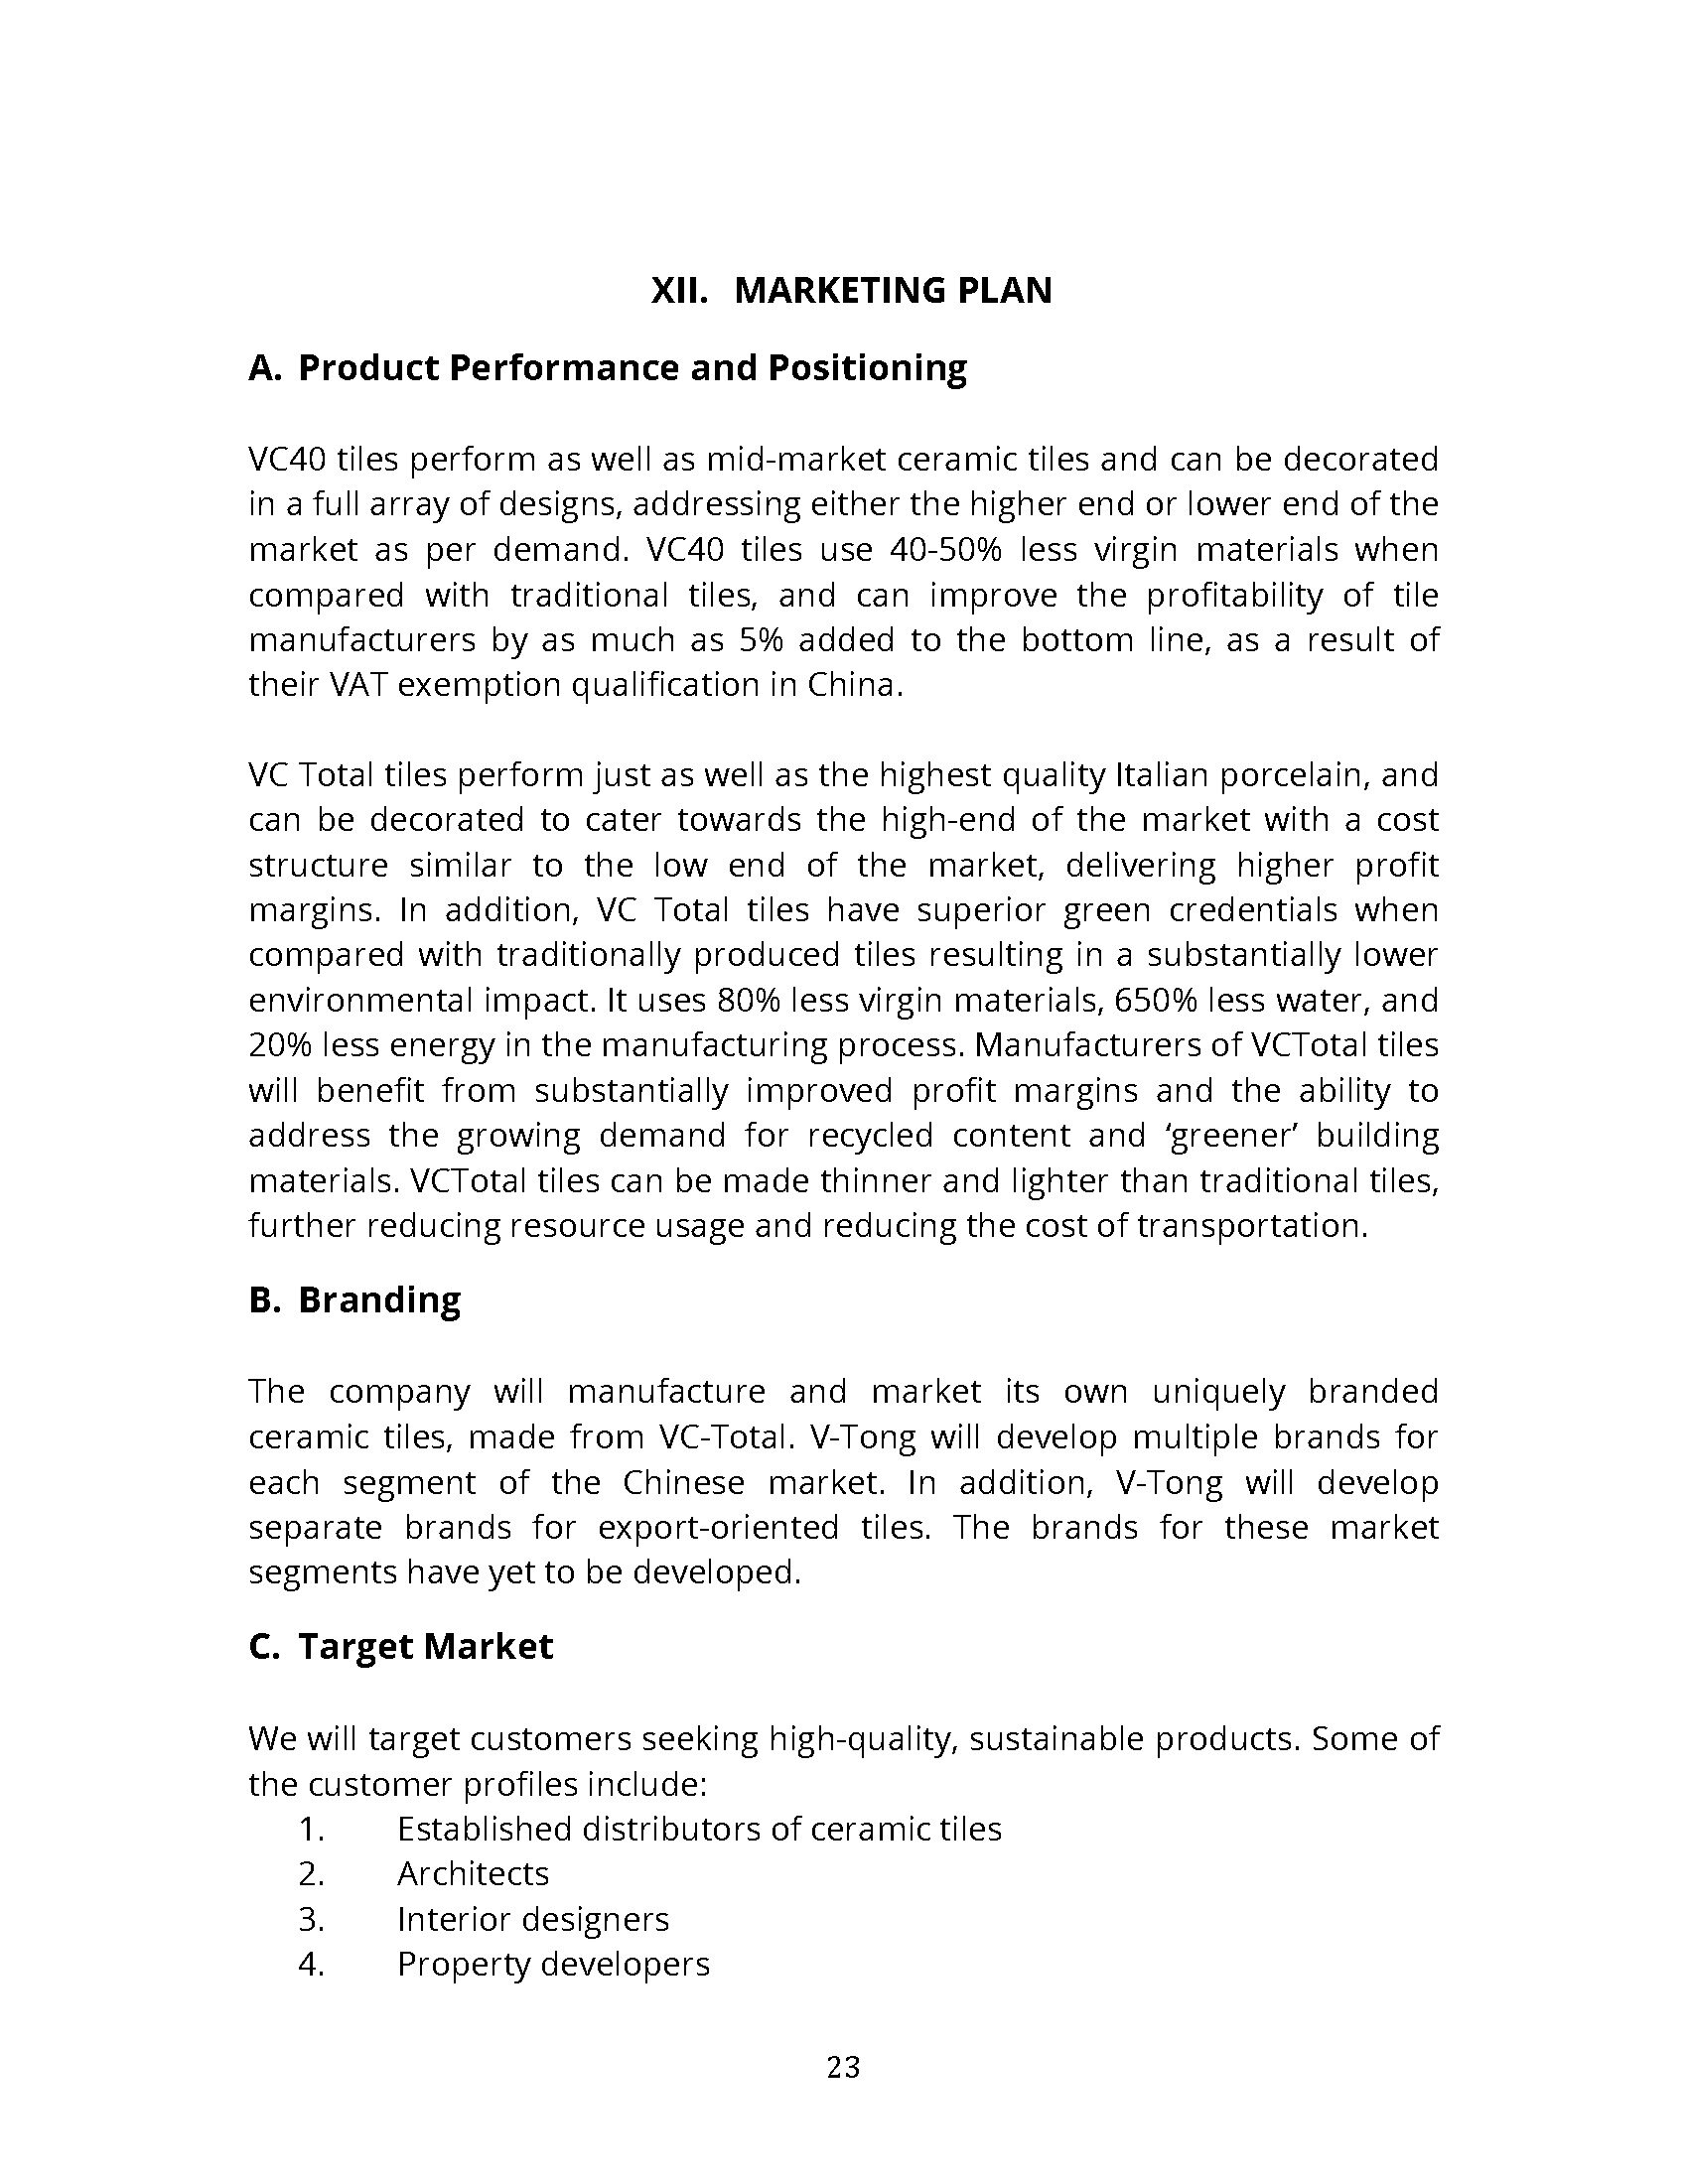 Business Plan for Vecor_Page_23.jpg